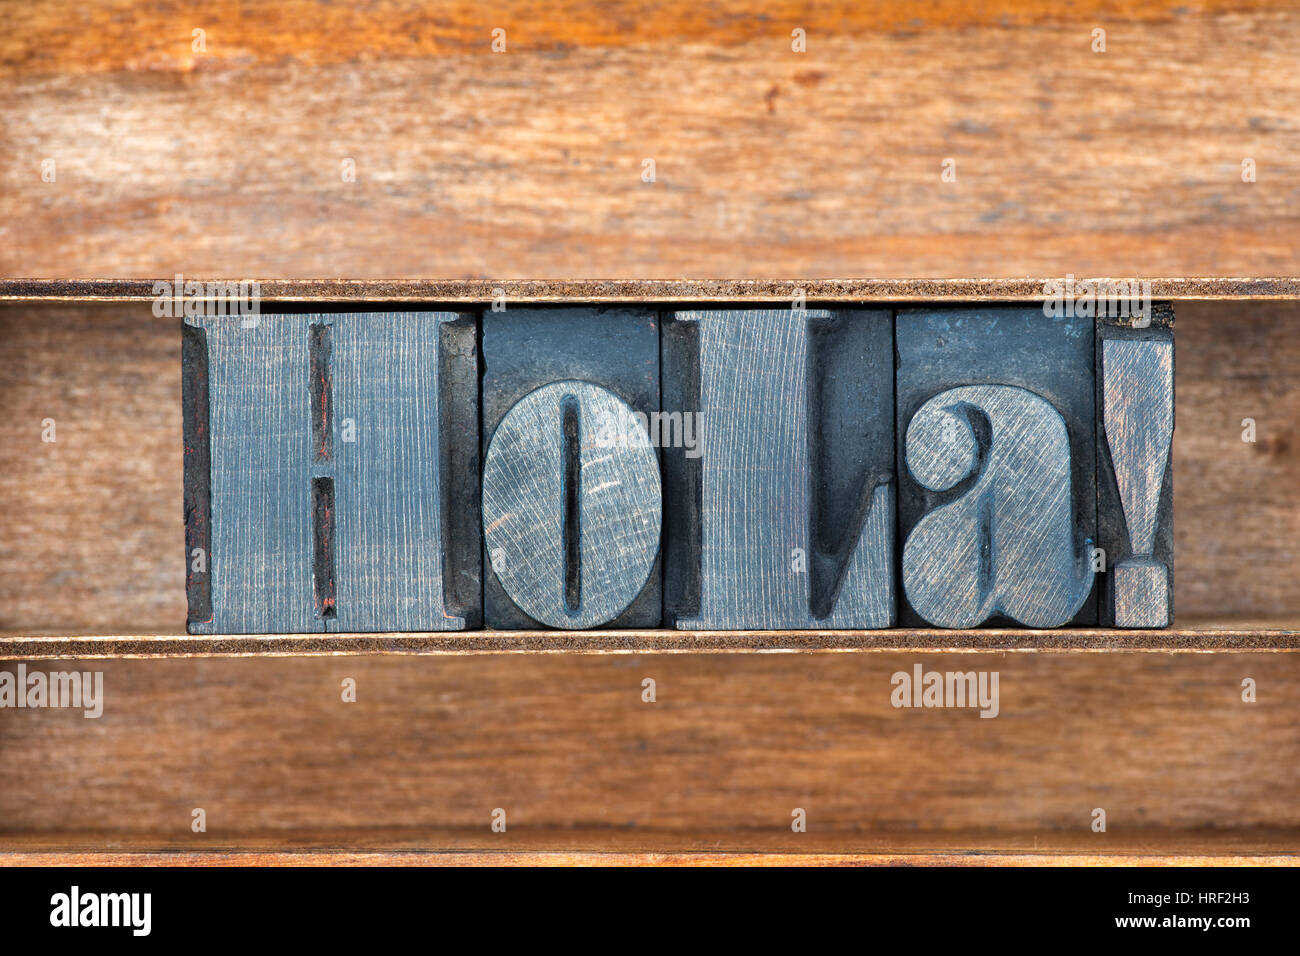 hola - Spanish greeting word made from vintage letterpress type on wooden tray Stock Photo